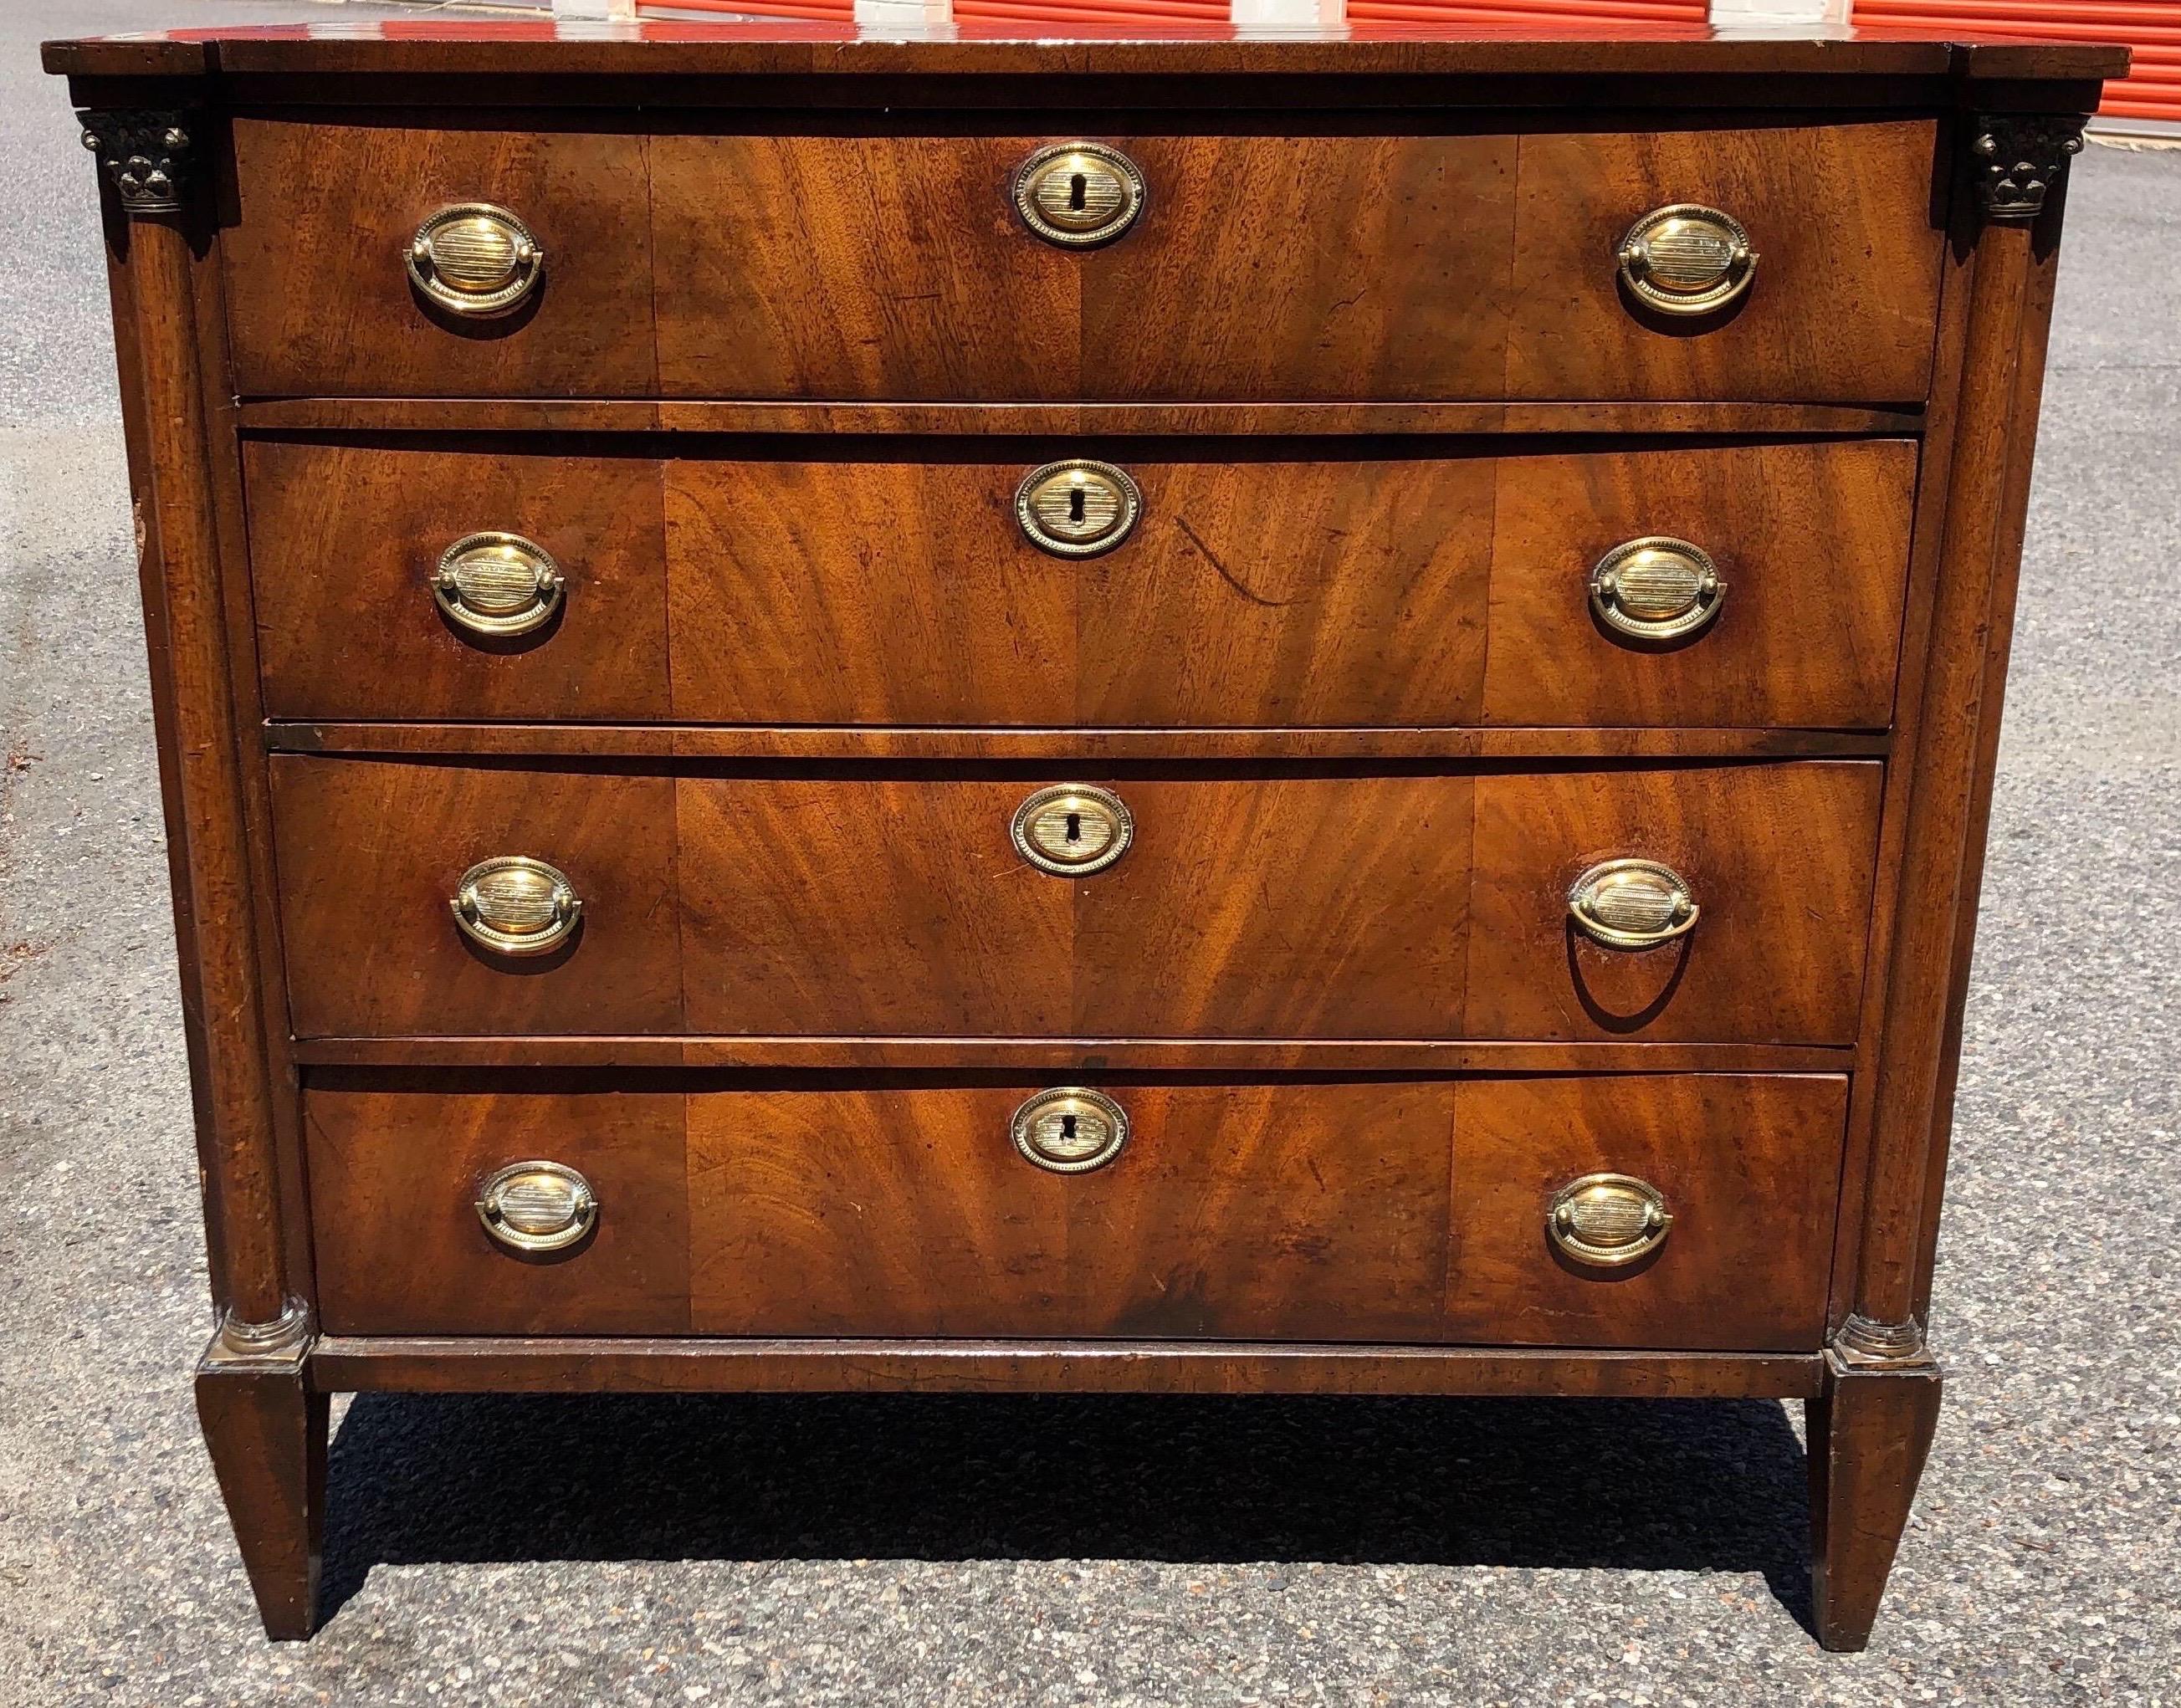 19th century French empire walnut chest with original pulls. Drawers centered between columns with bronze capitals. Few old charming restorations throughout- see photos.